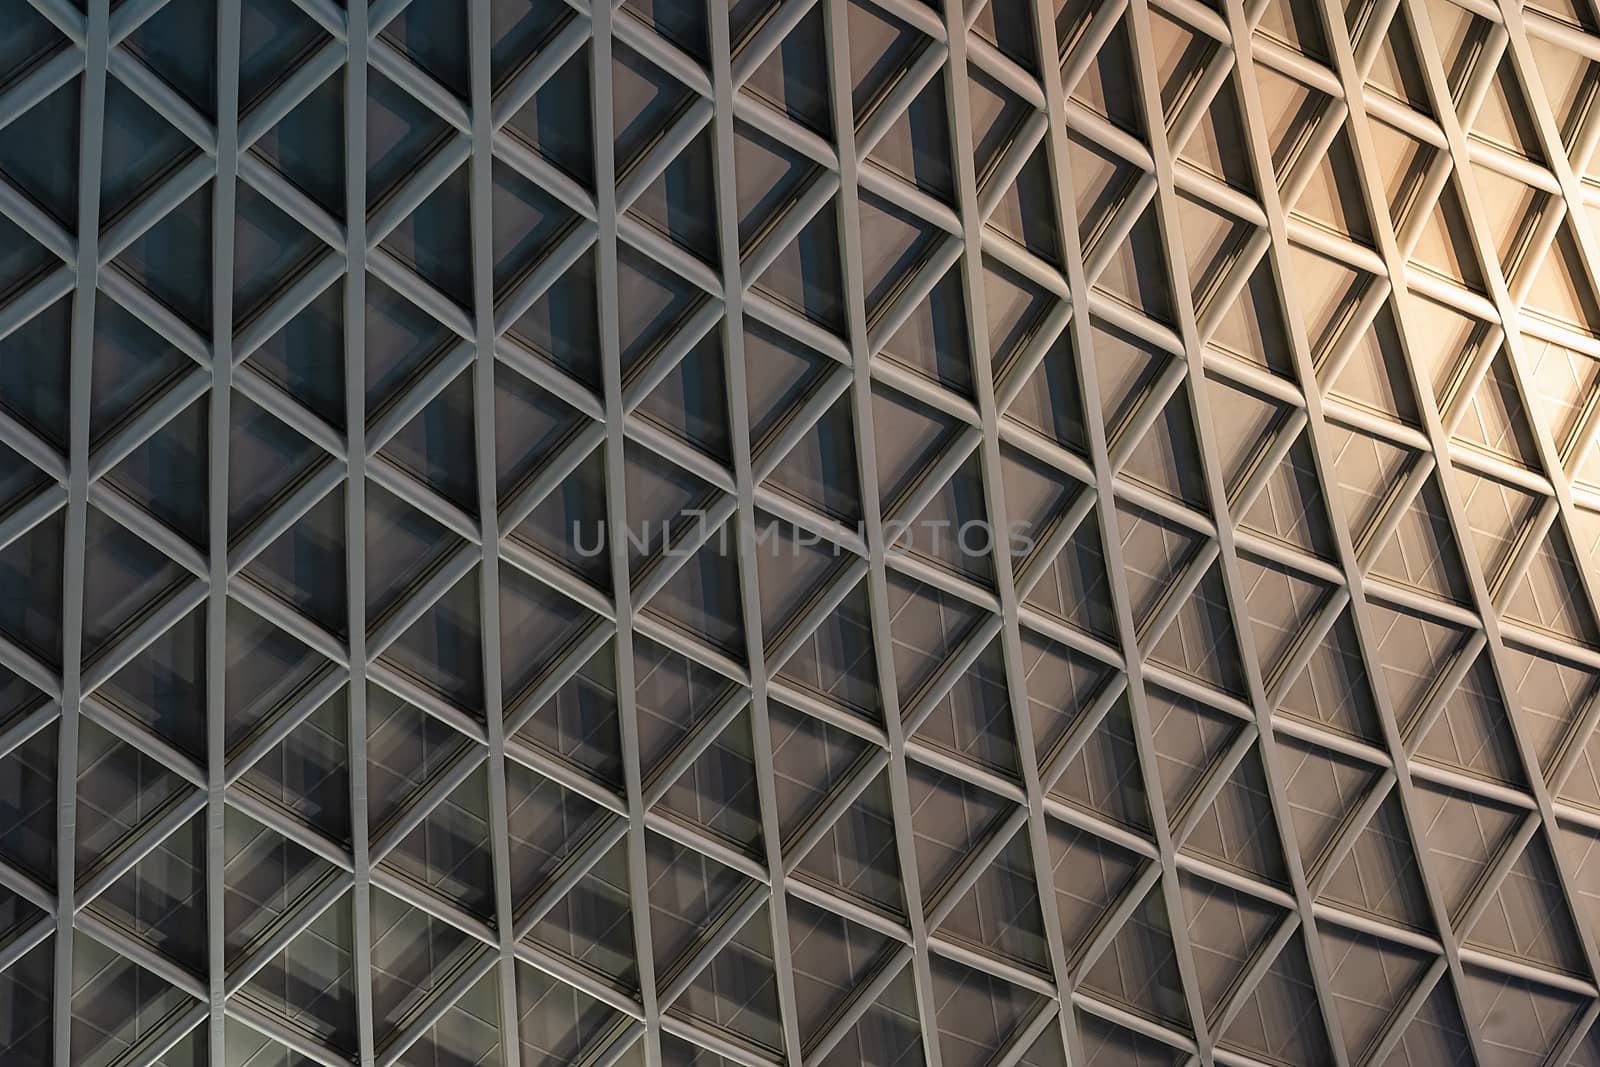 London, UK - Jan 2020:  The contemporary lattice ceiling of King's Cross railway station concourse, designed by John McAslan and partners. King's Cross station is a major transport hub.